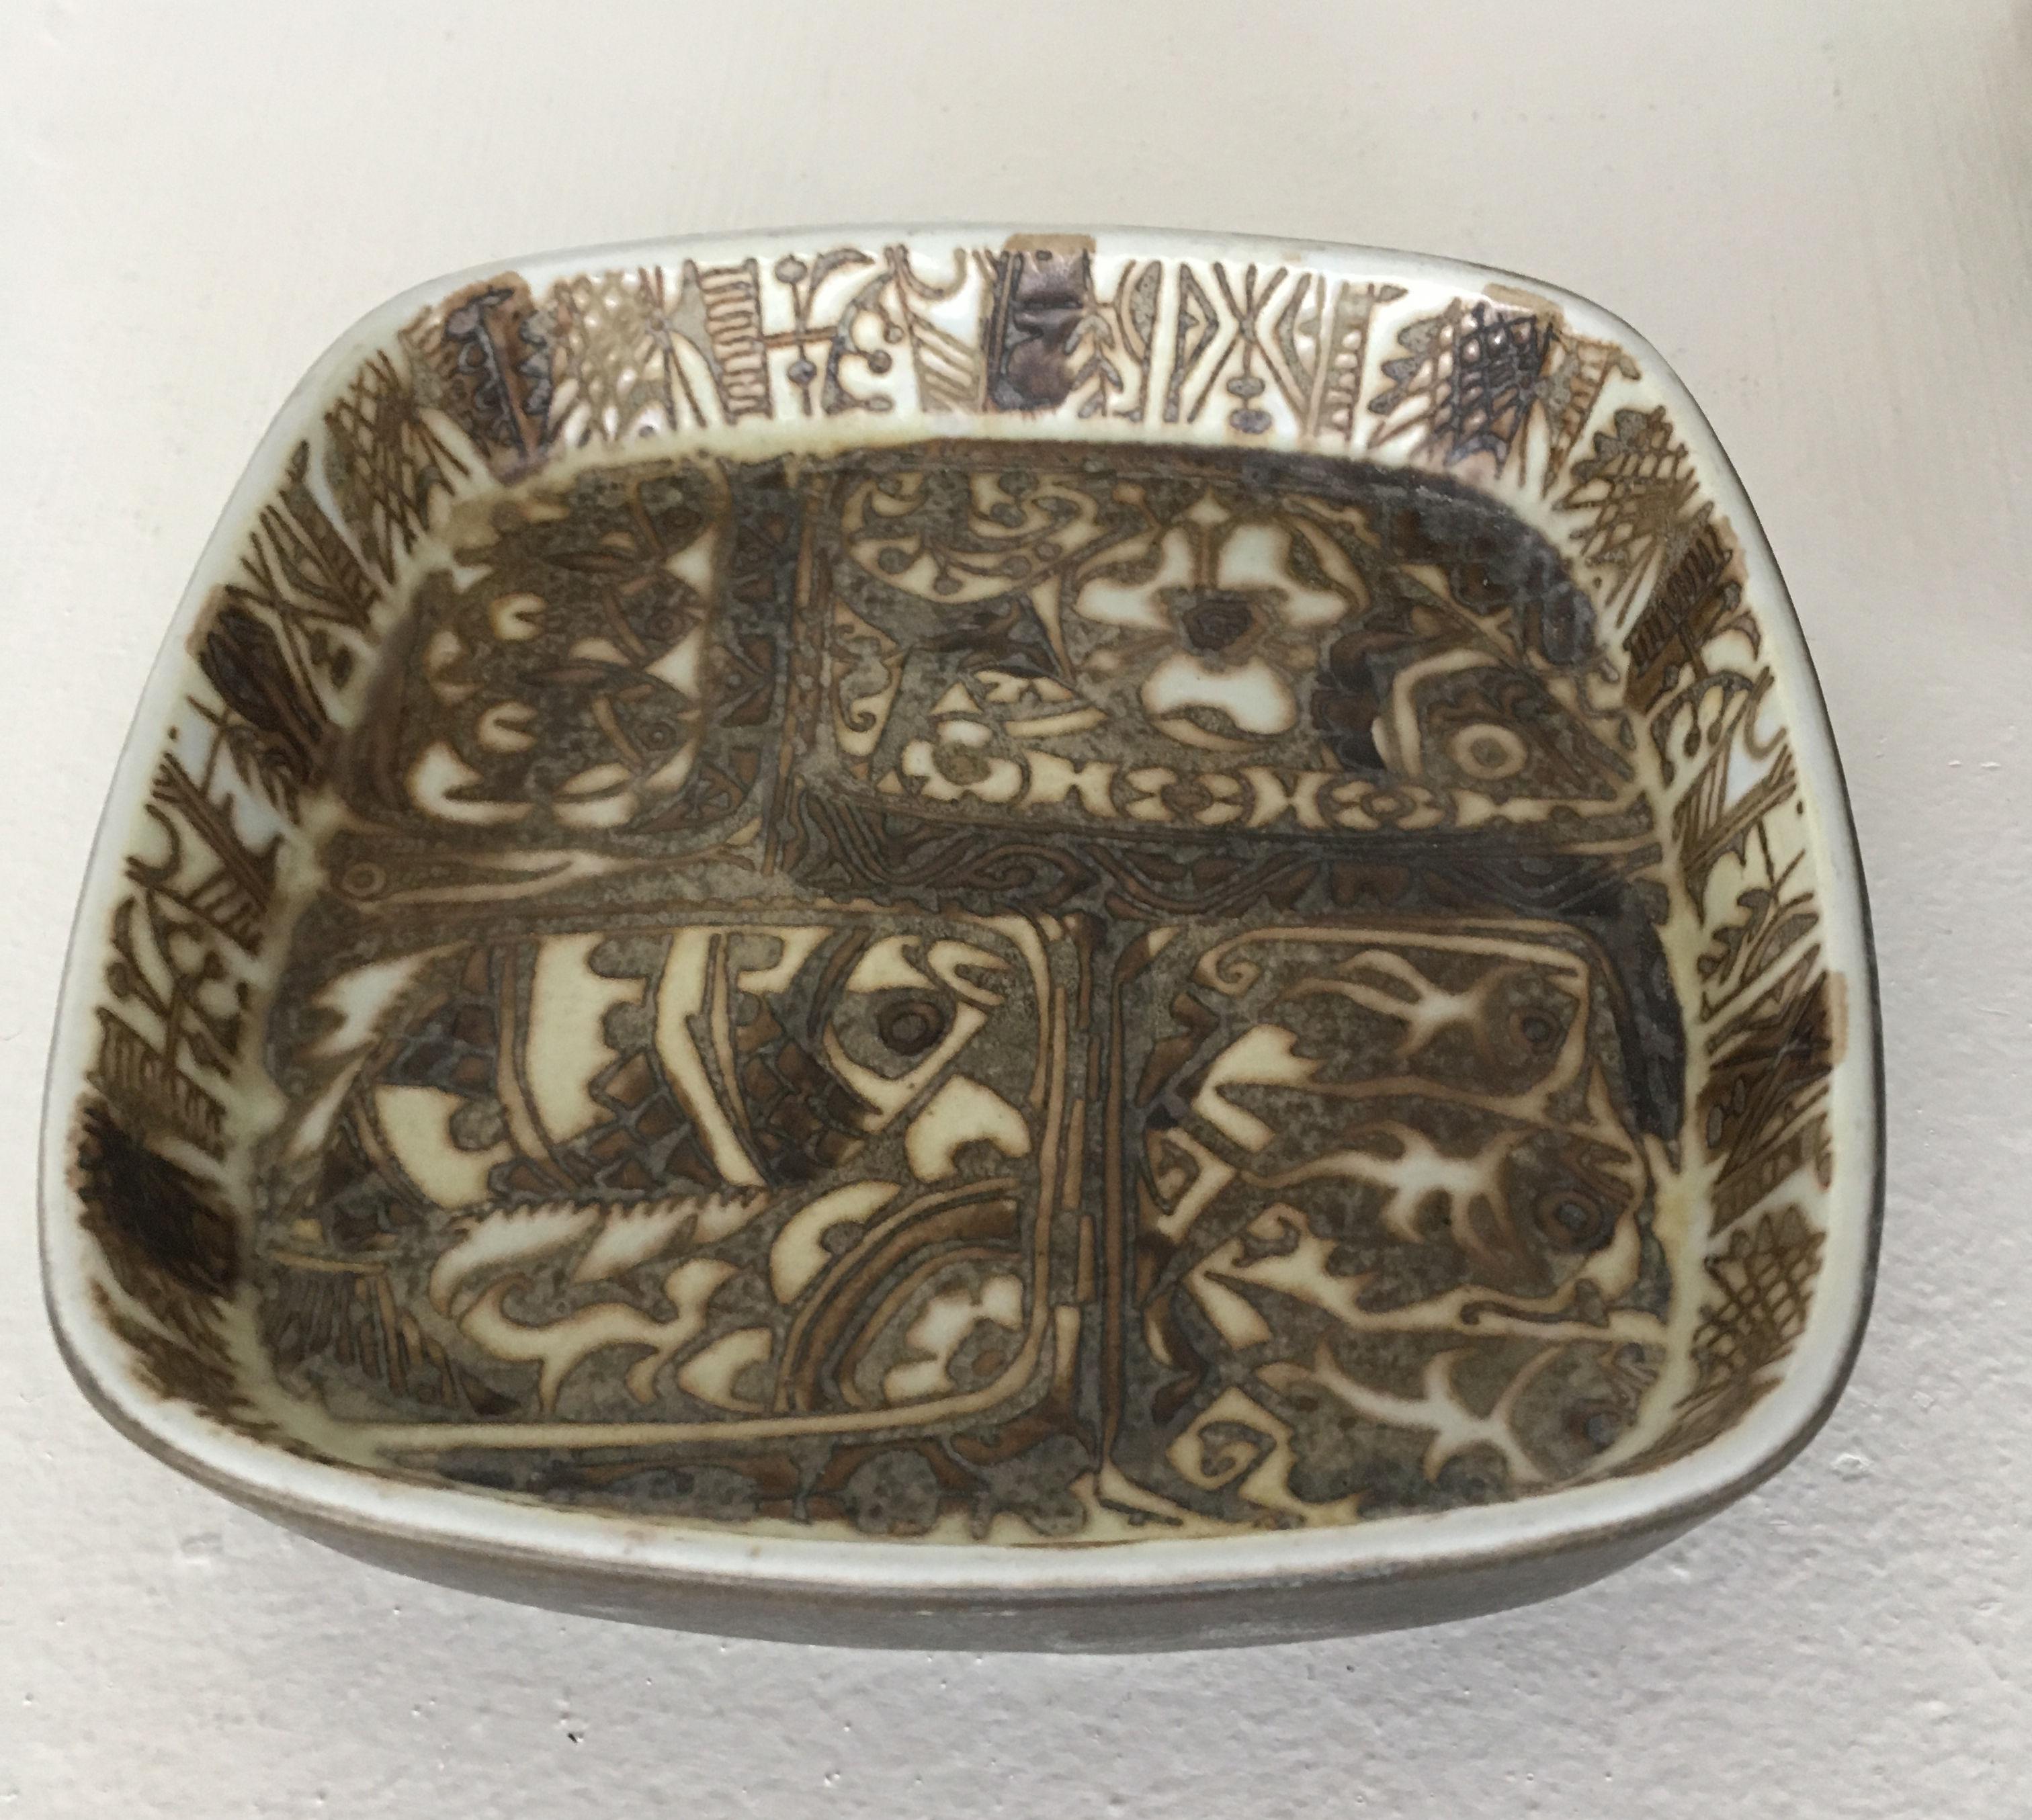 Nils Thorsson for Royal Copenhagen Aluminia Faience glazed Baca bowl, in abstract design, circa 1960s 

Beautiful pieces of signed and numbered Danish top craftsmanship 

Nils Thorsson (1898-1975) first appeared as an artist when he in 1925 he